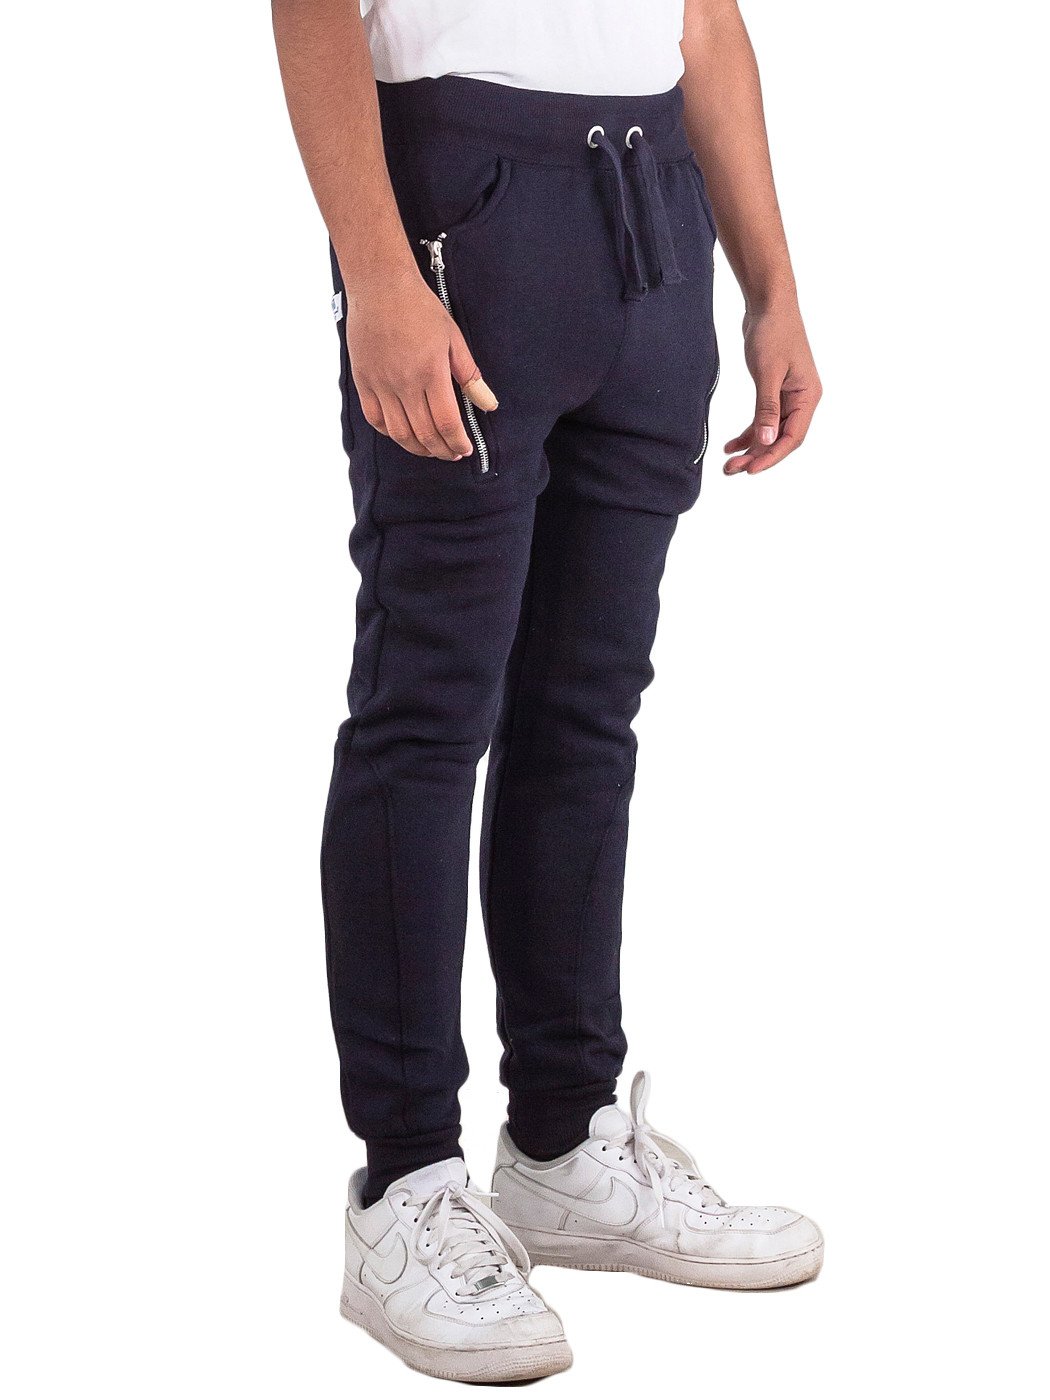 Mens Tracksuit Skinny Gym Zip SweatPants Sports Trousers Bottoms ...